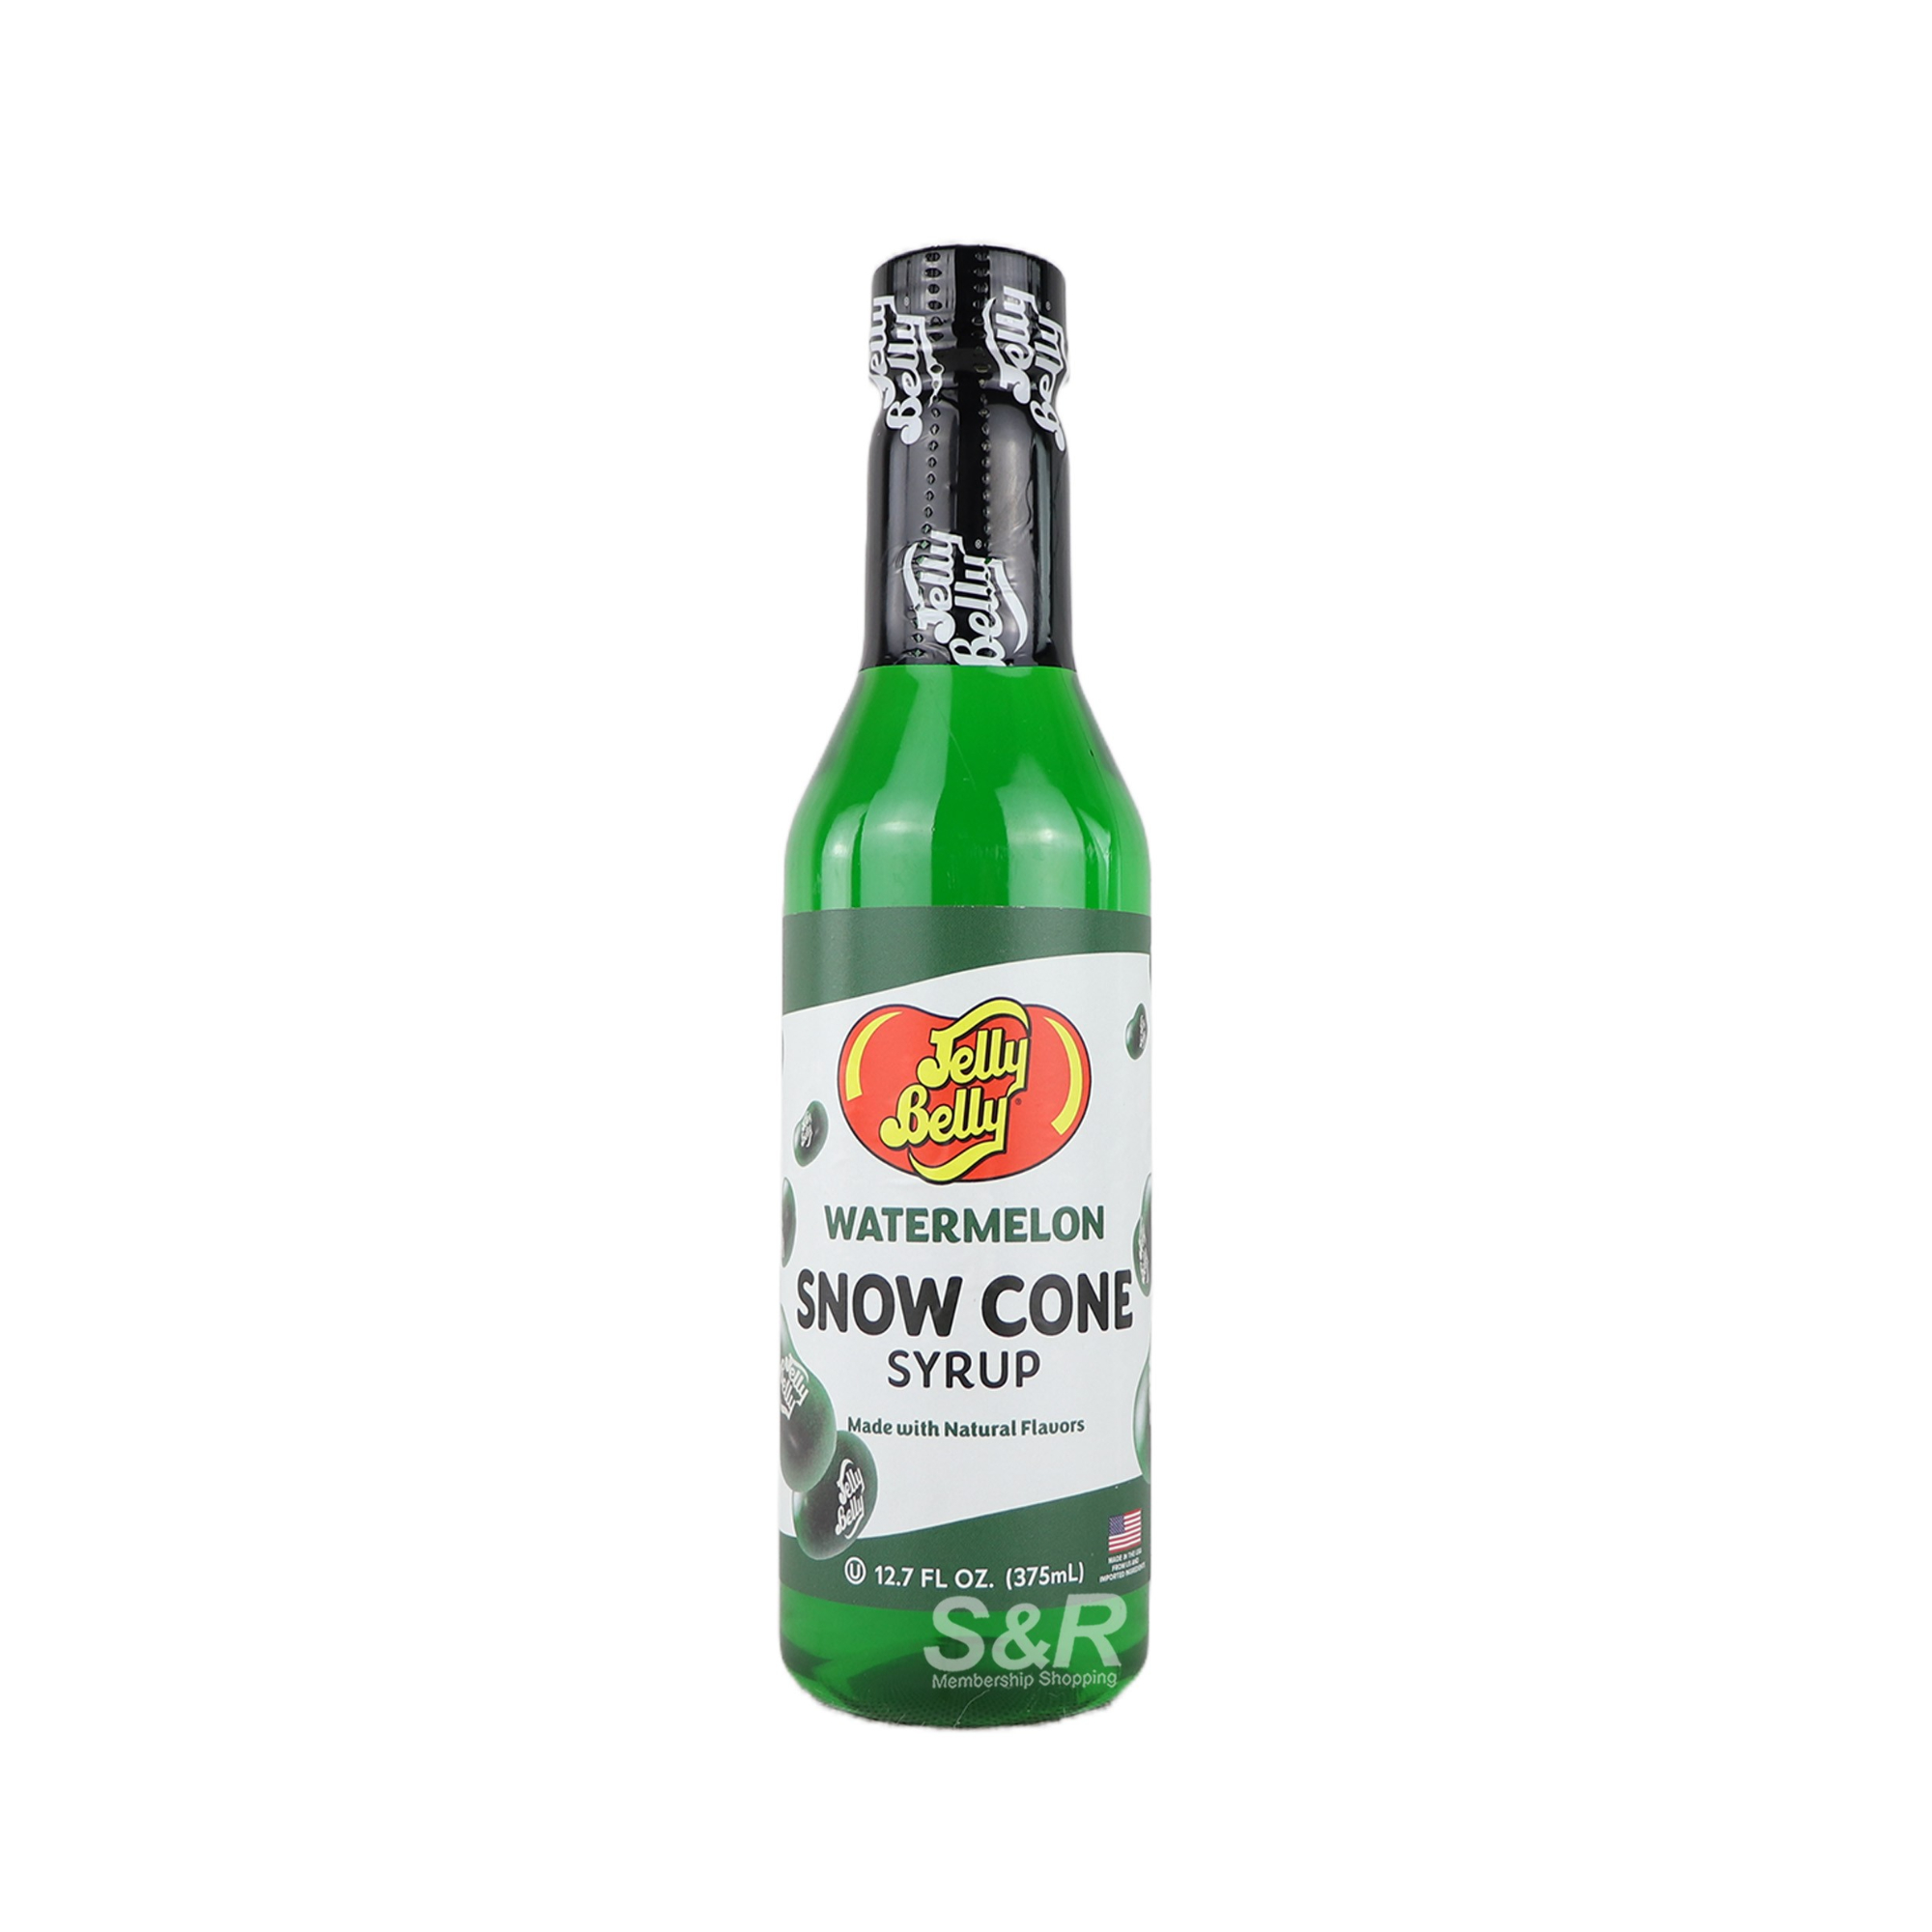 Jelly Belly Watermelon Snow Cone Syrup 375mL